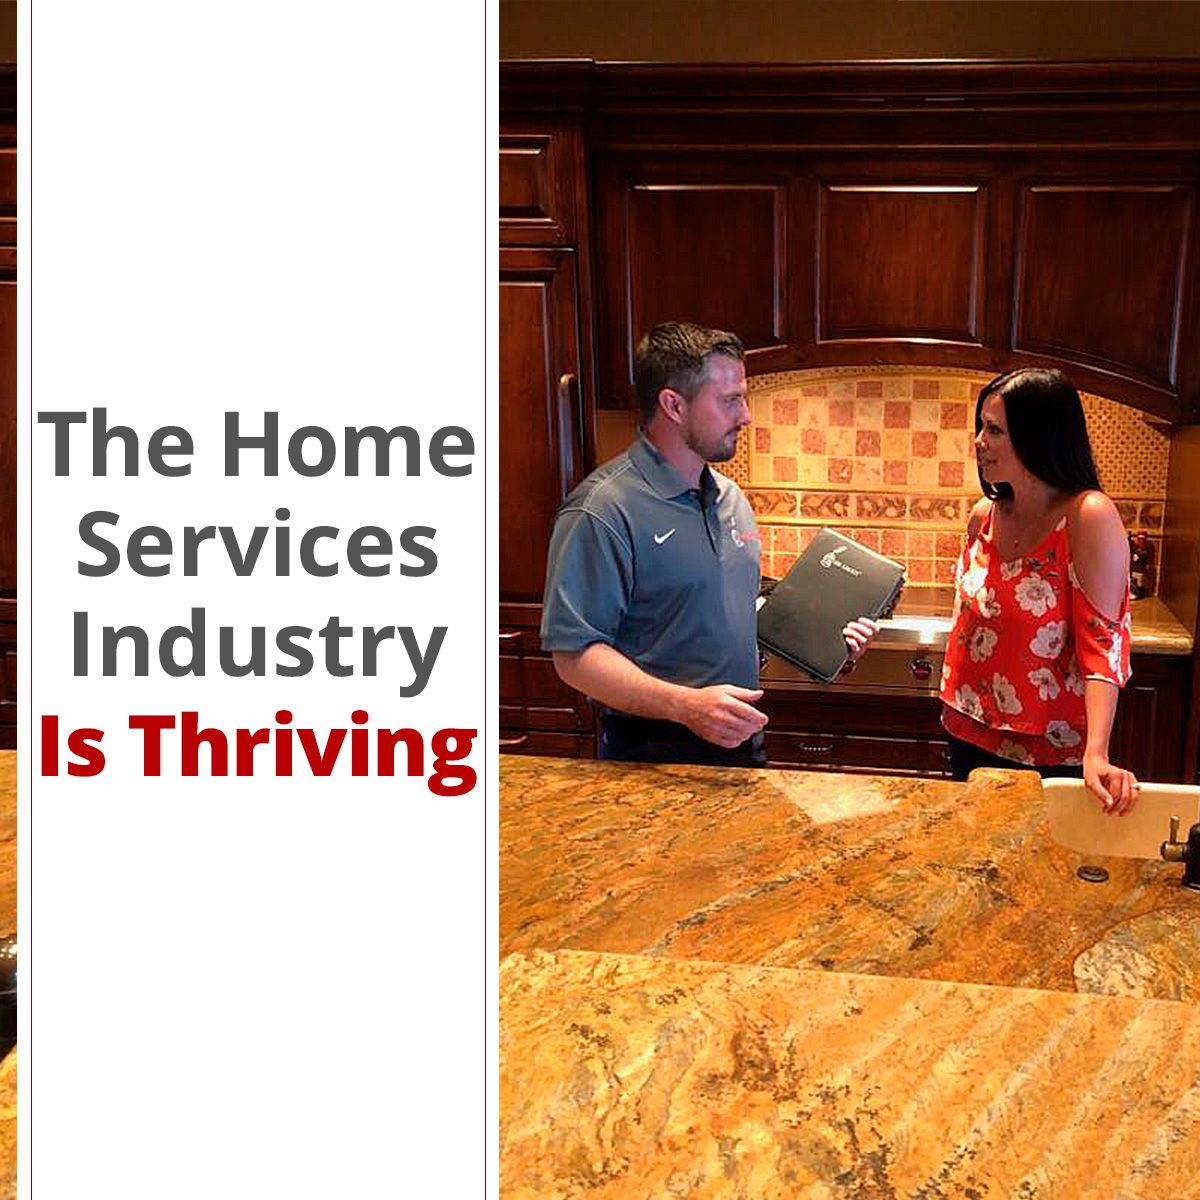 The Home Services Industry Is Thriving